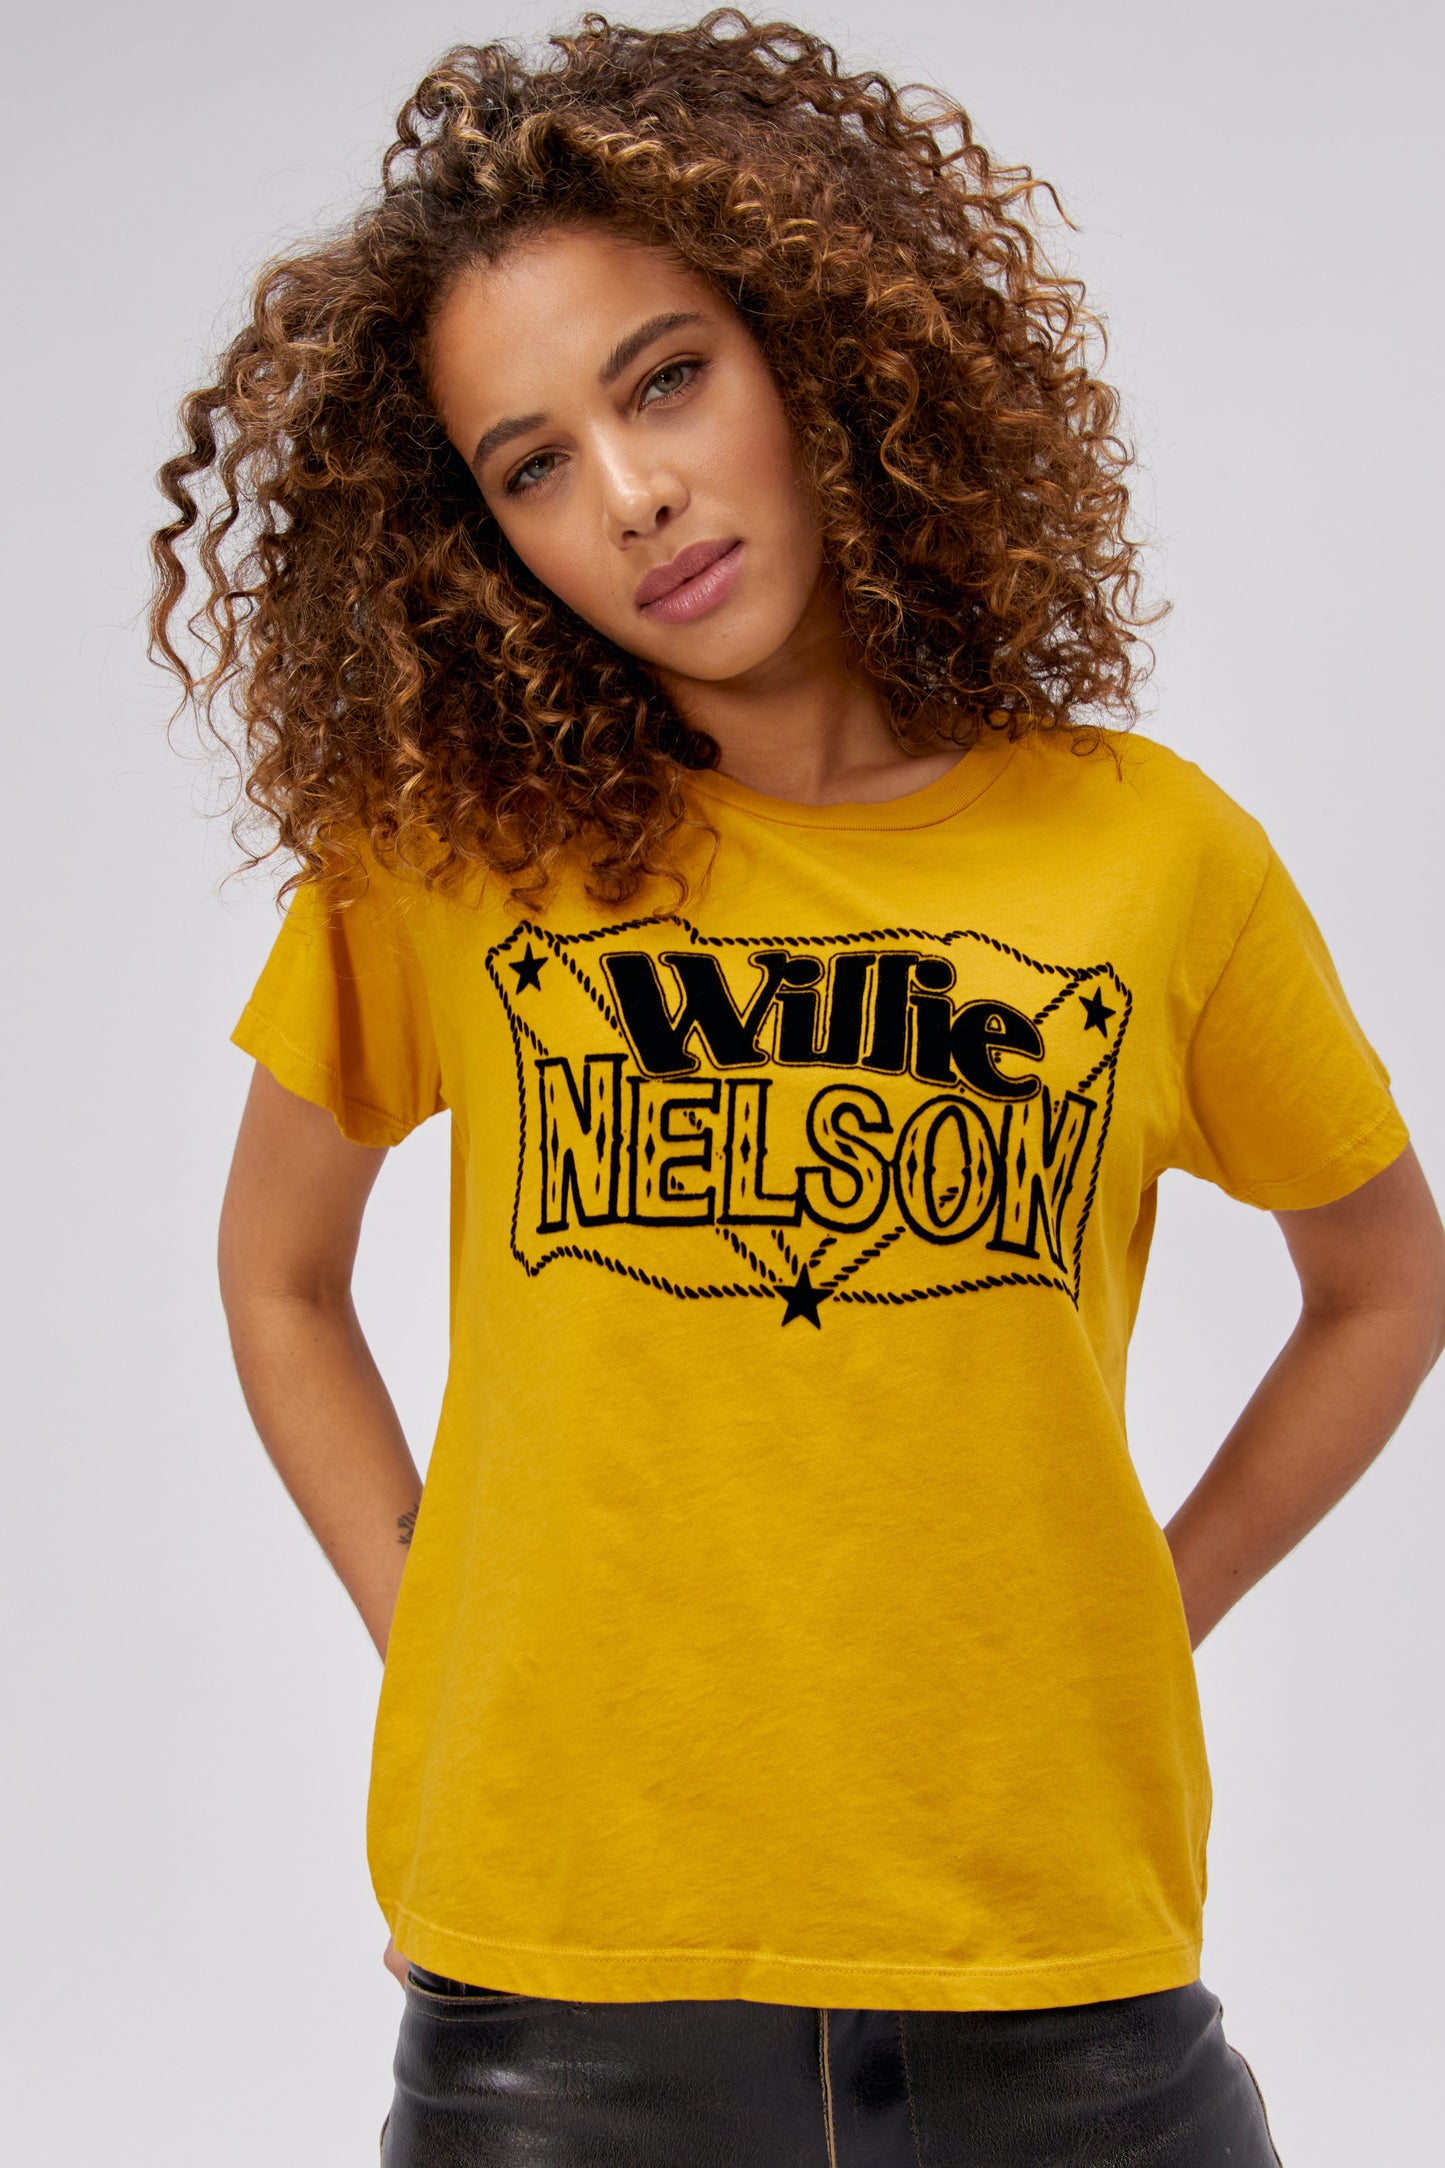 A curly-haired model featuring a golden daze tee stamped with 'Willie Nelson' in front and 'Genuine Outlaw Music' at the back.